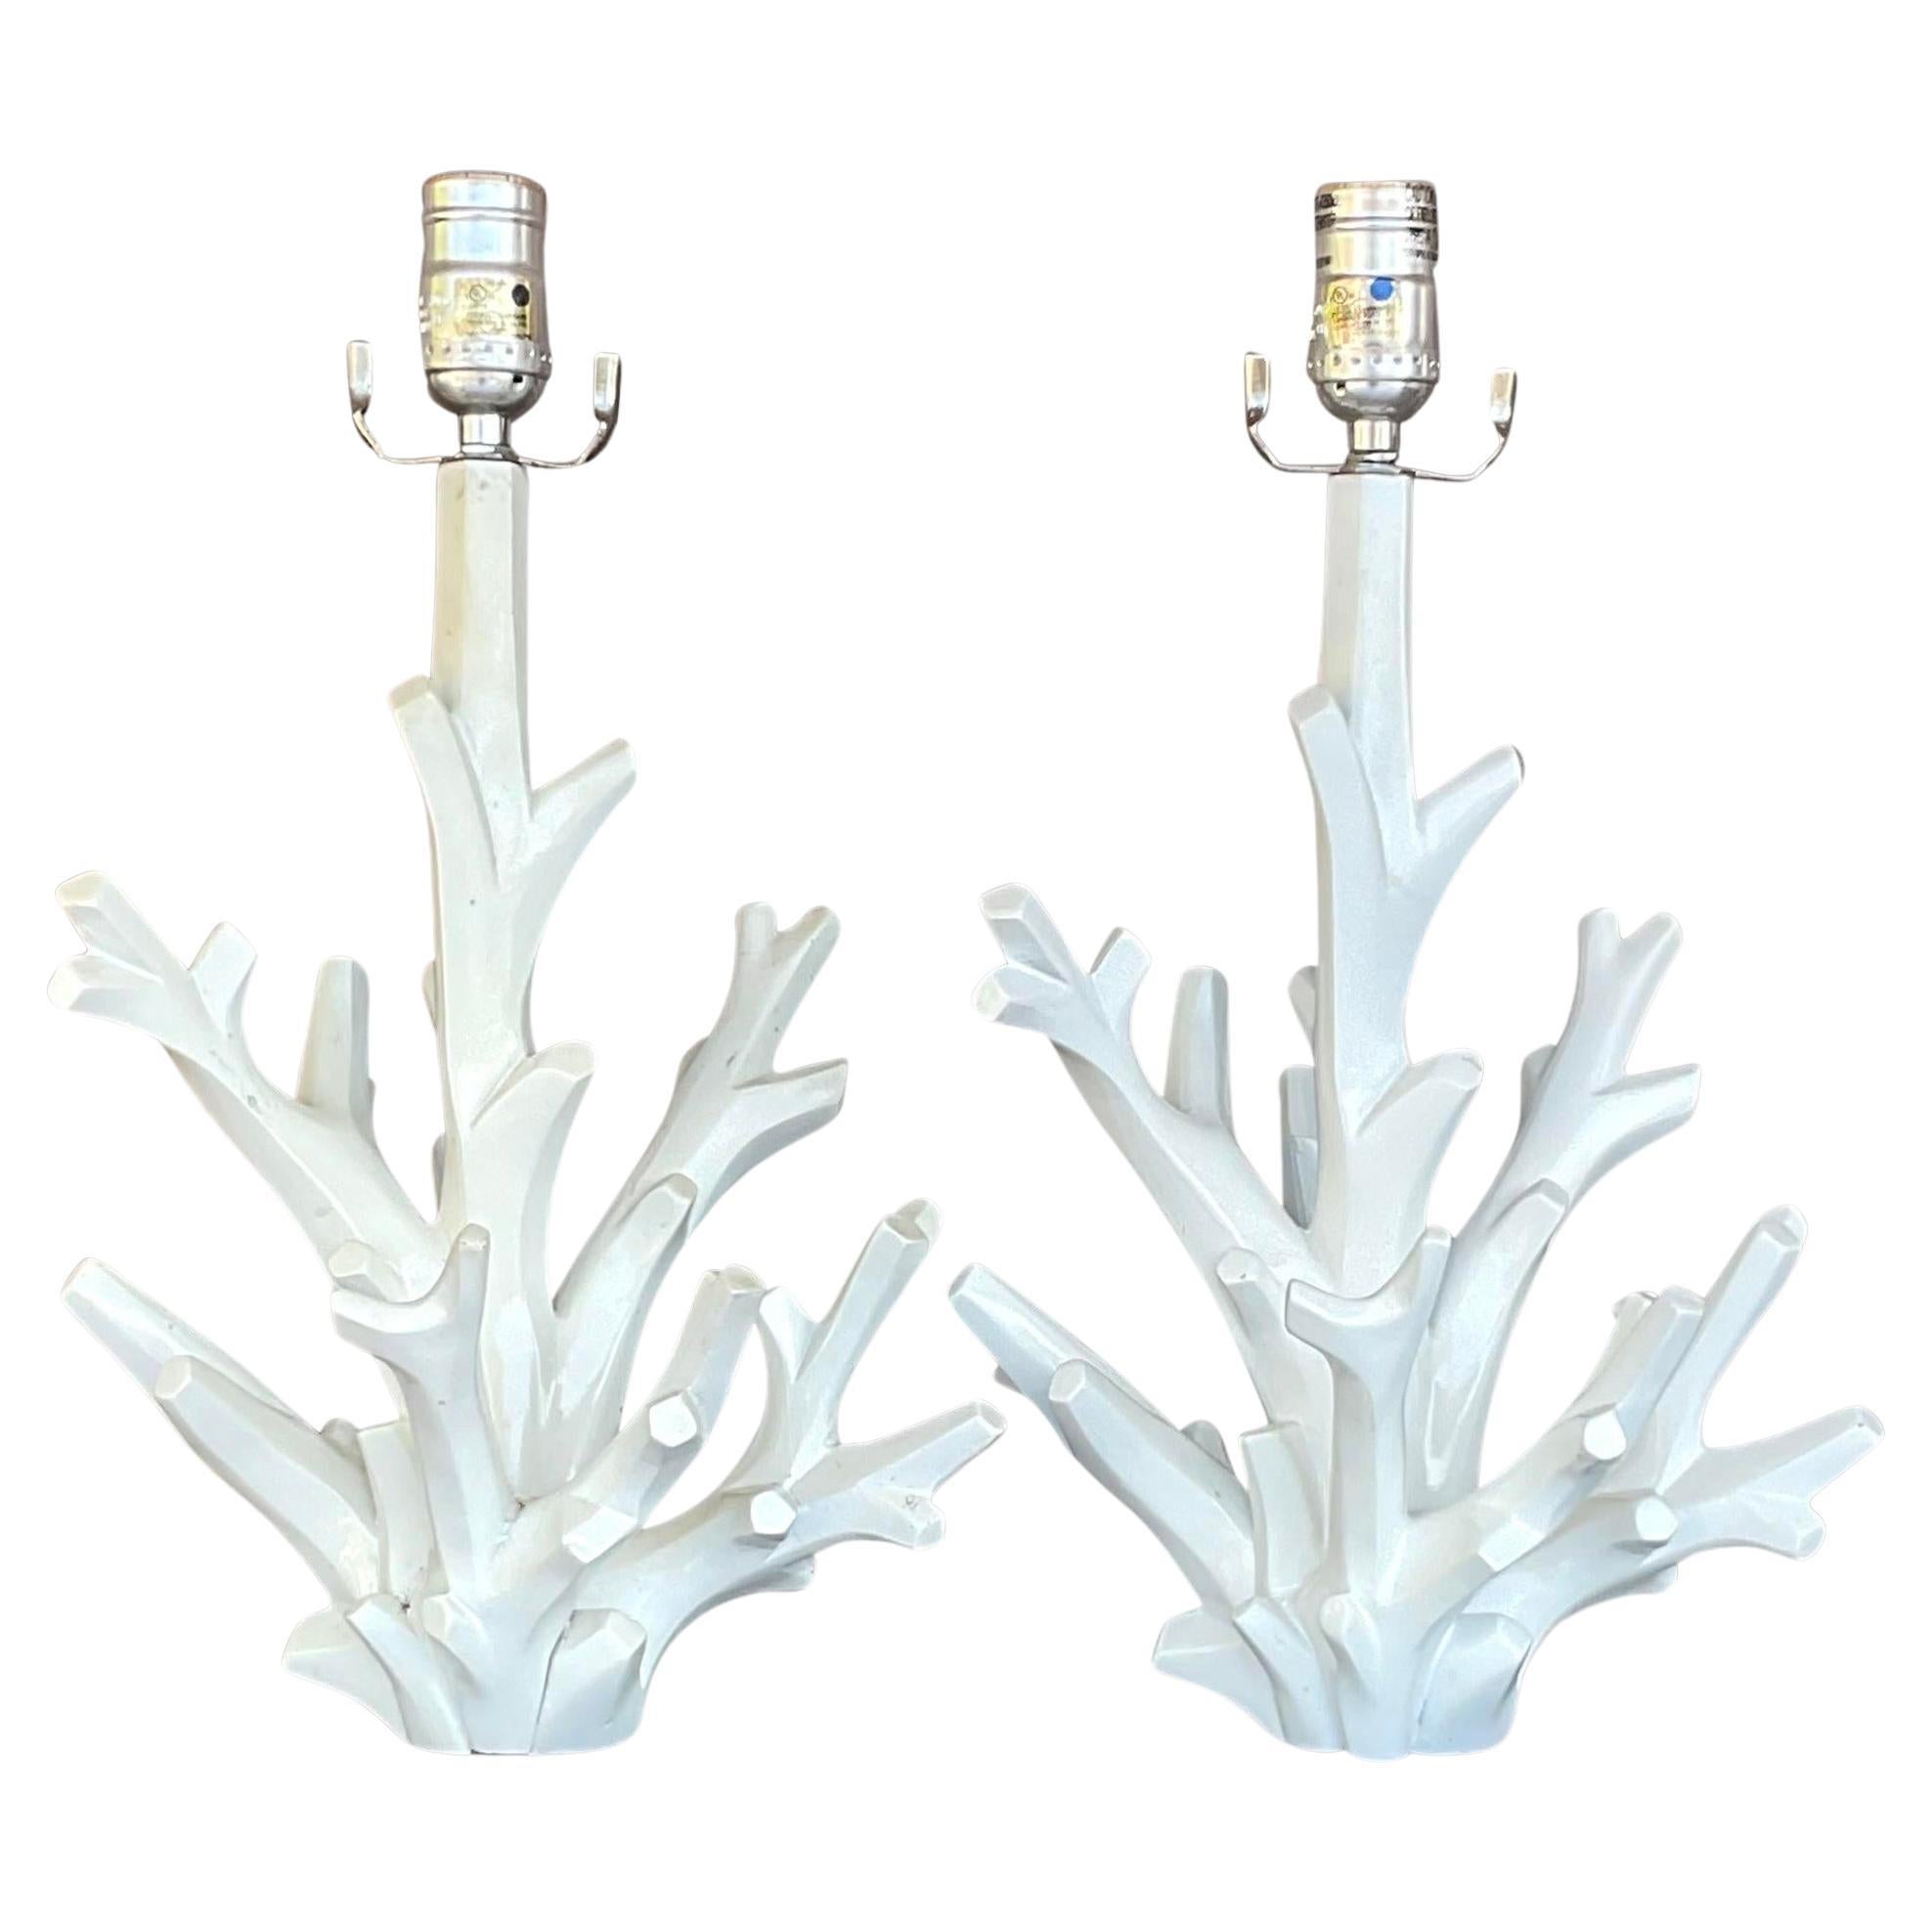 Vintage Coastal Coral Branch Wood Lamps - a Pair For Sale